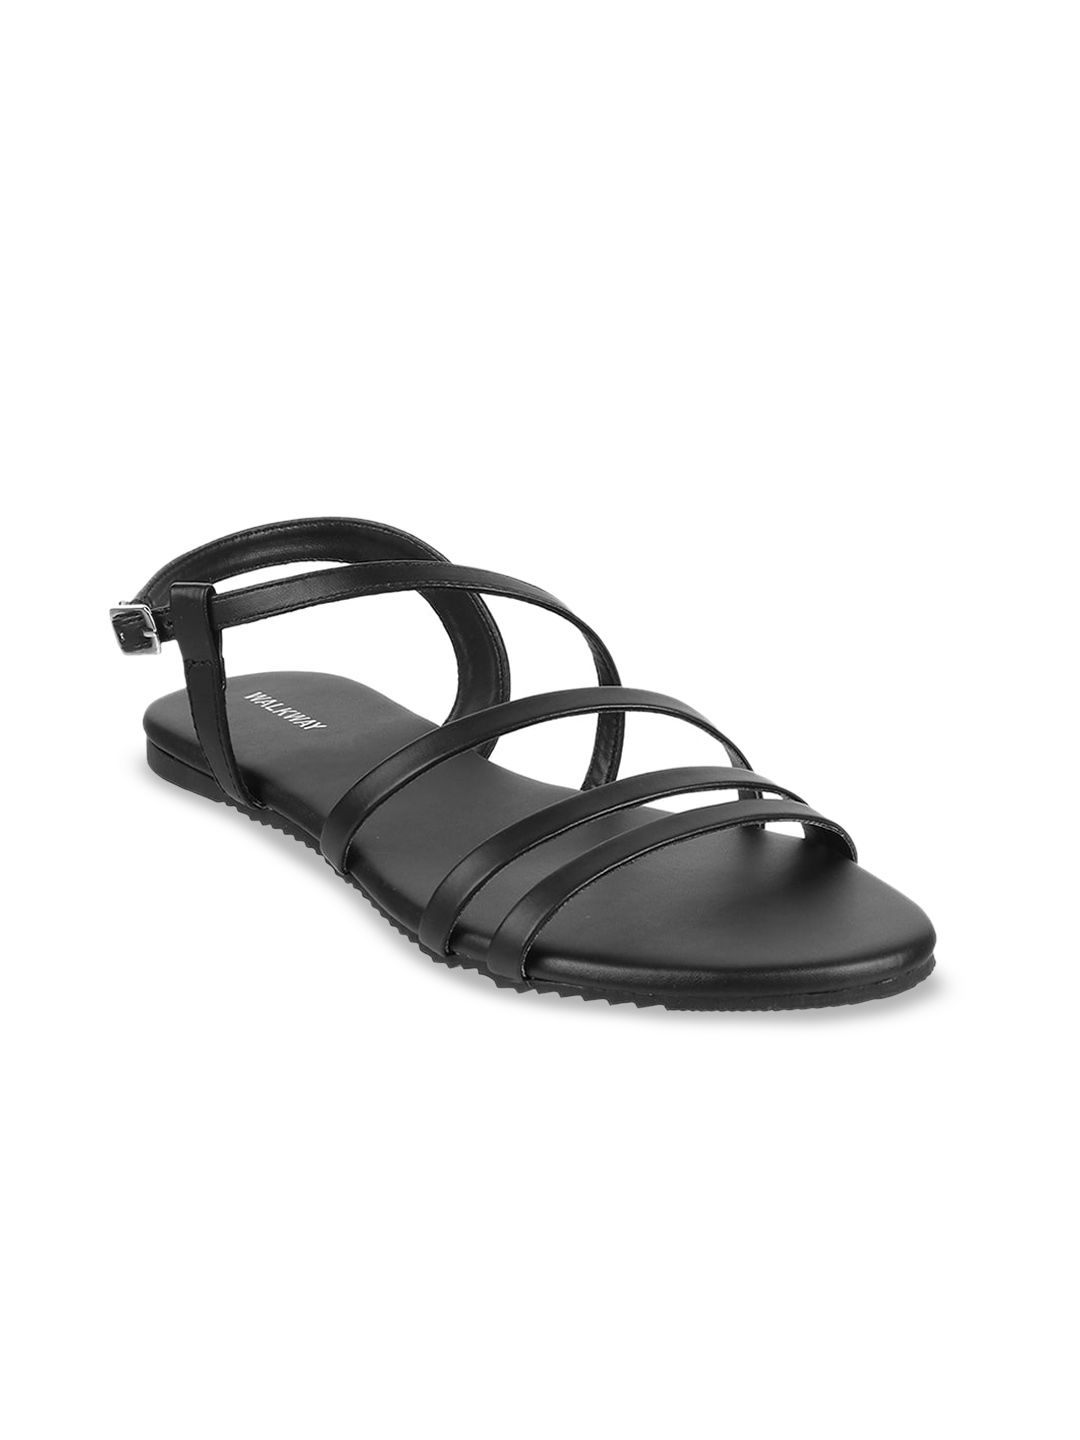 WALKWAY by Metro Women Open Toe Flats With Backstrap Price in India